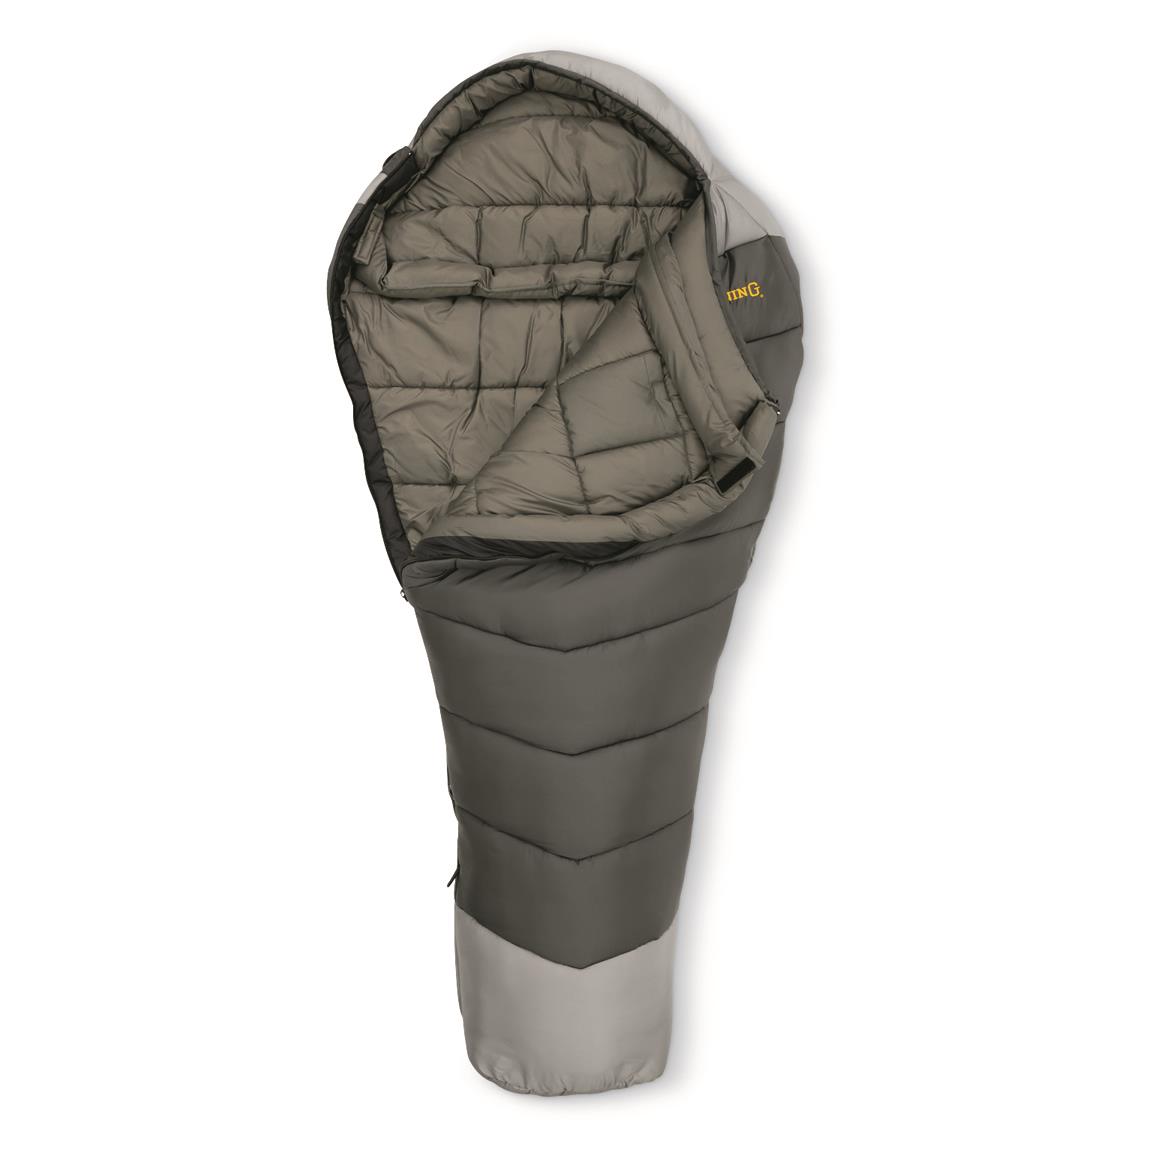 Insulated chest and zipper baffle ensure you maximize your heat retention